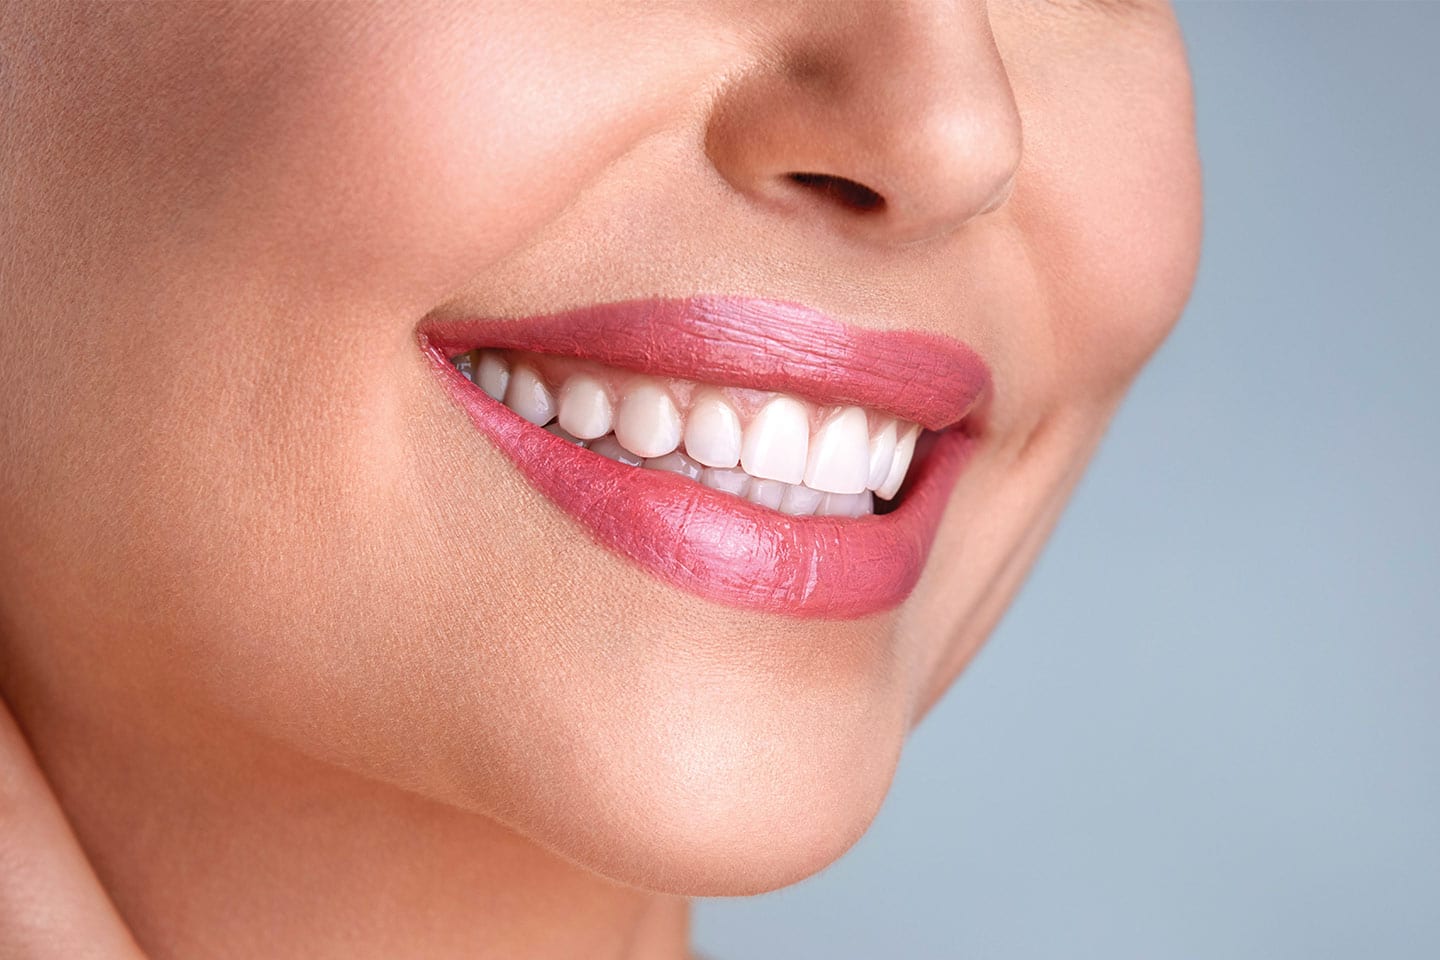 woman smiling with dental implants